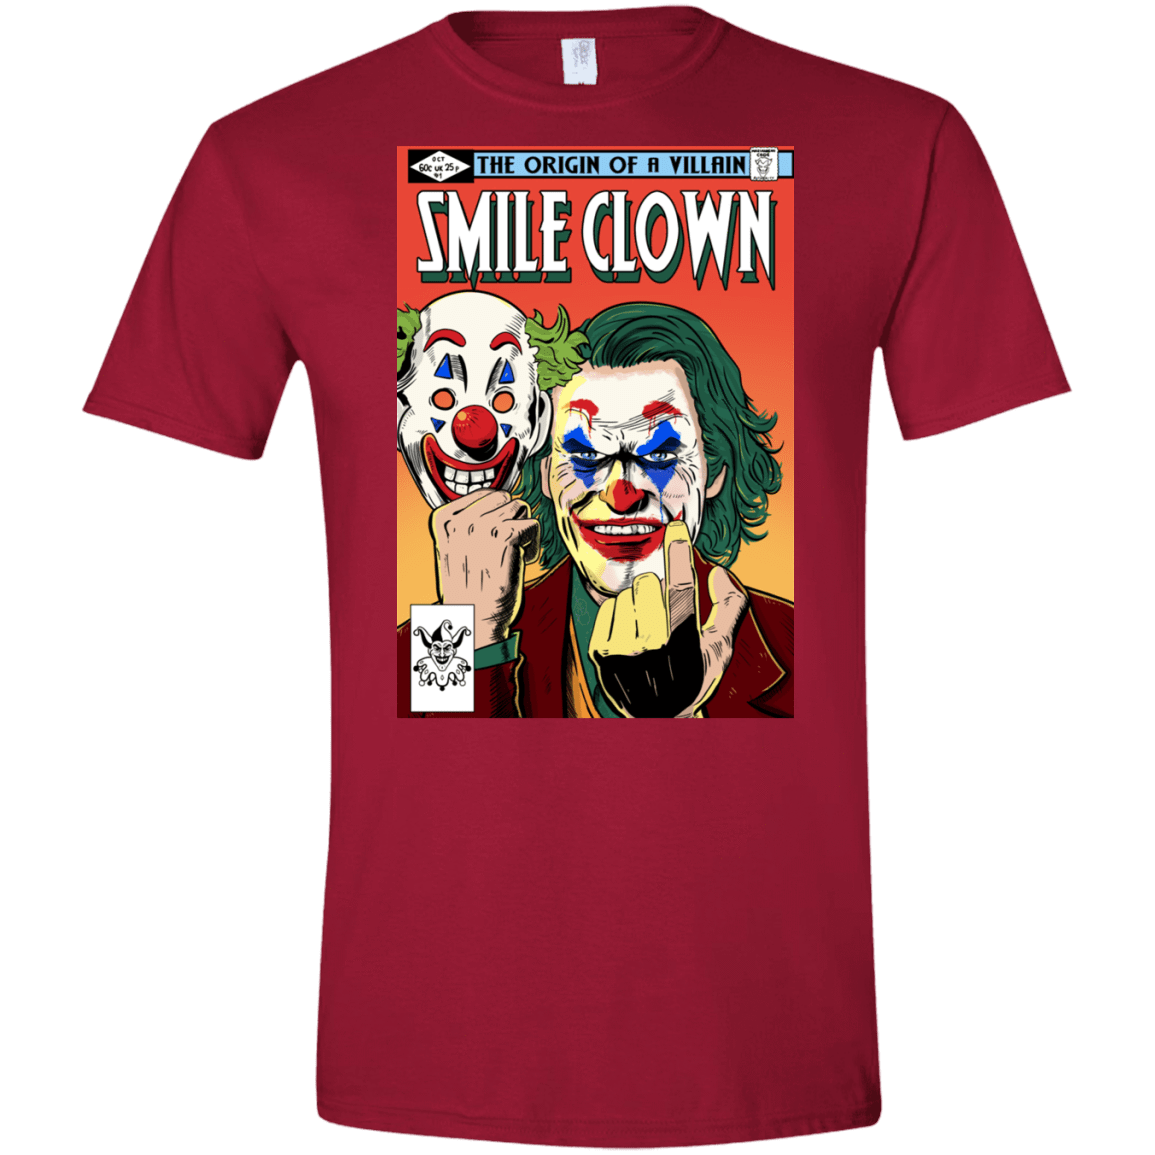 T-Shirts Cardinal Red / S Smile Clown Men's Semi-Fitted Softstyle